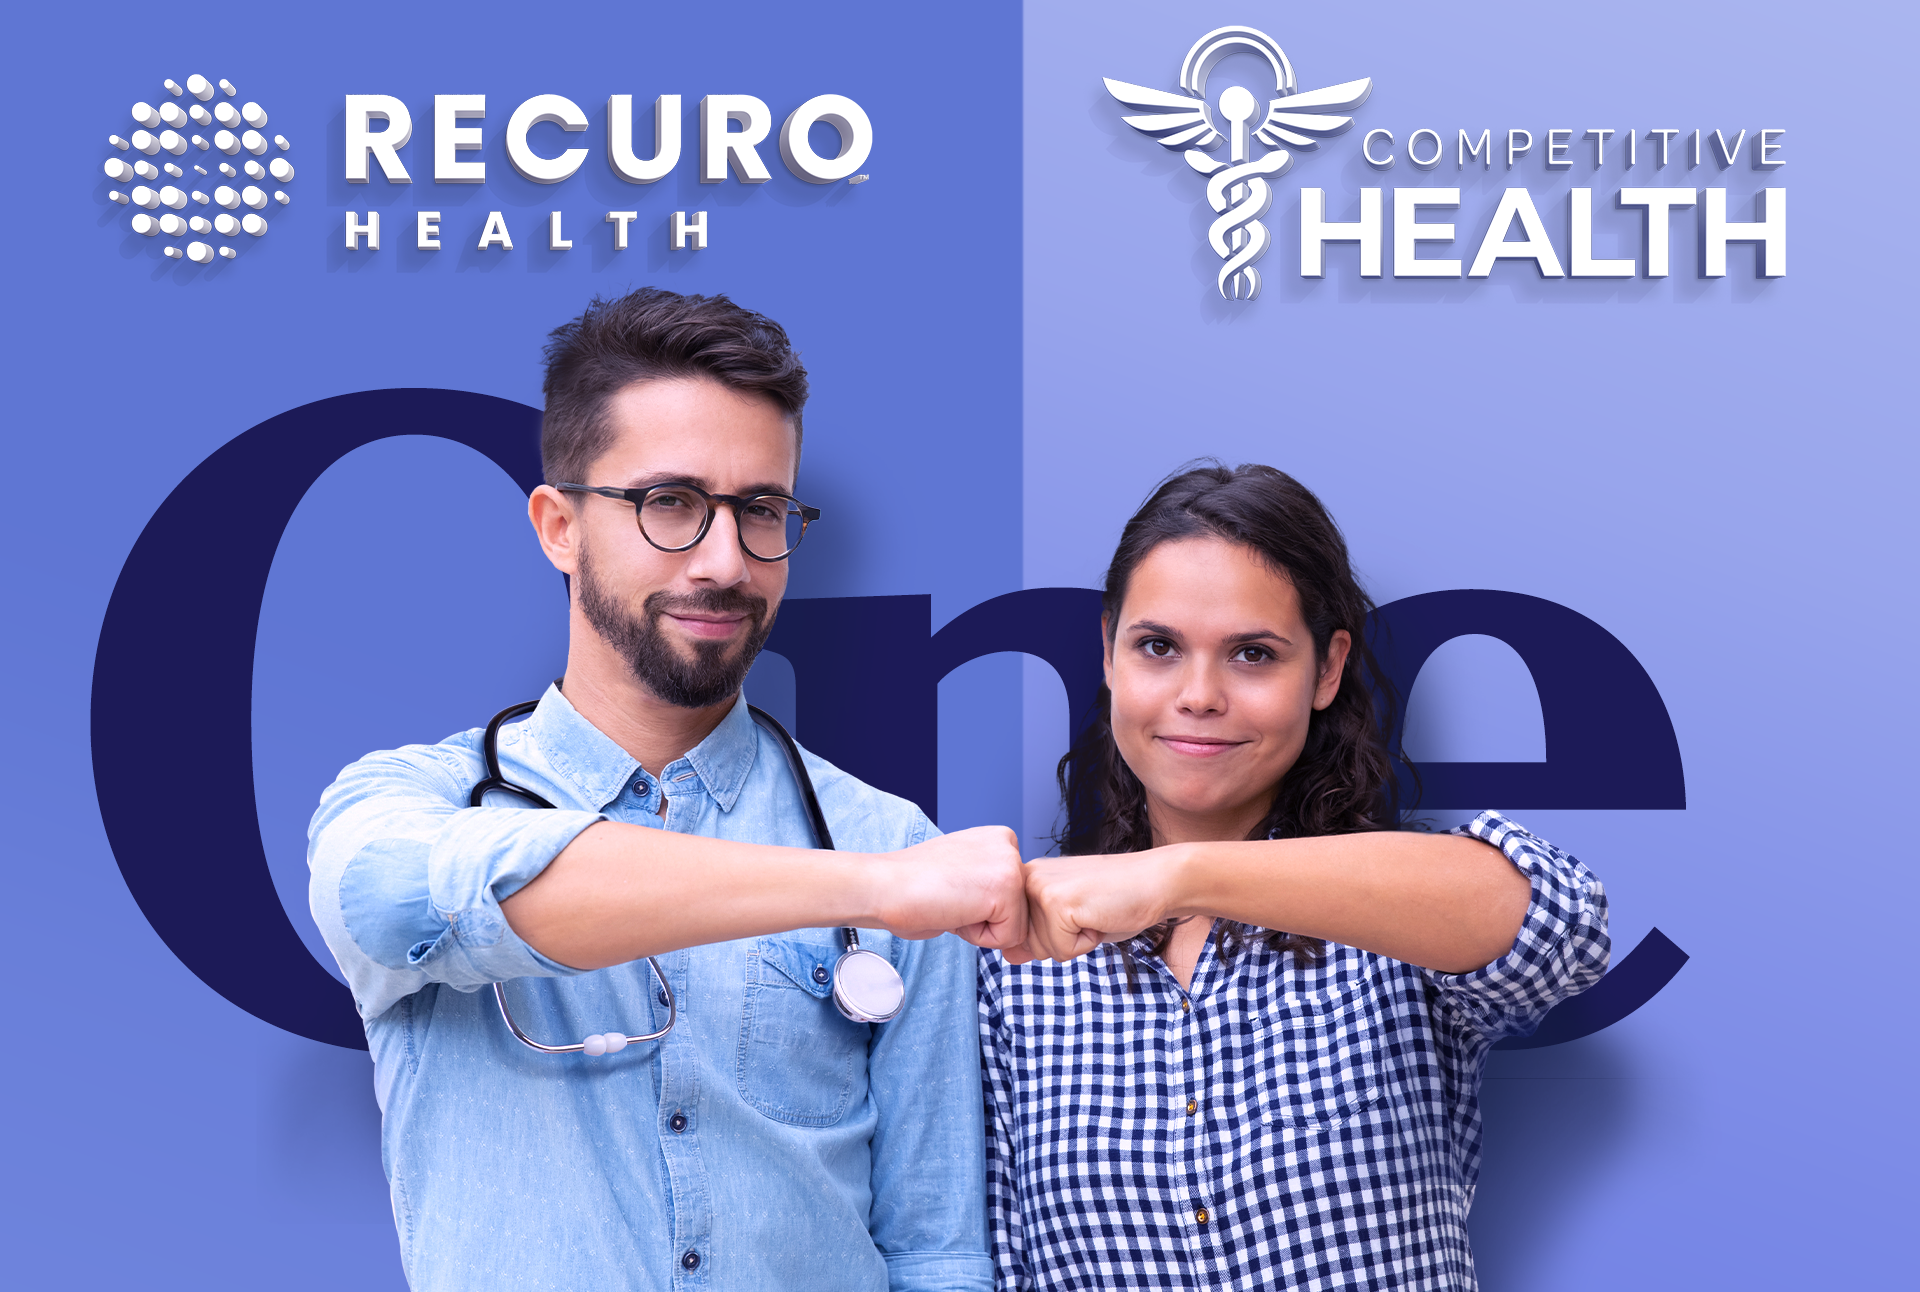 Recuro Health Acquires Competitive Health, A Leader in Integrated Benefits